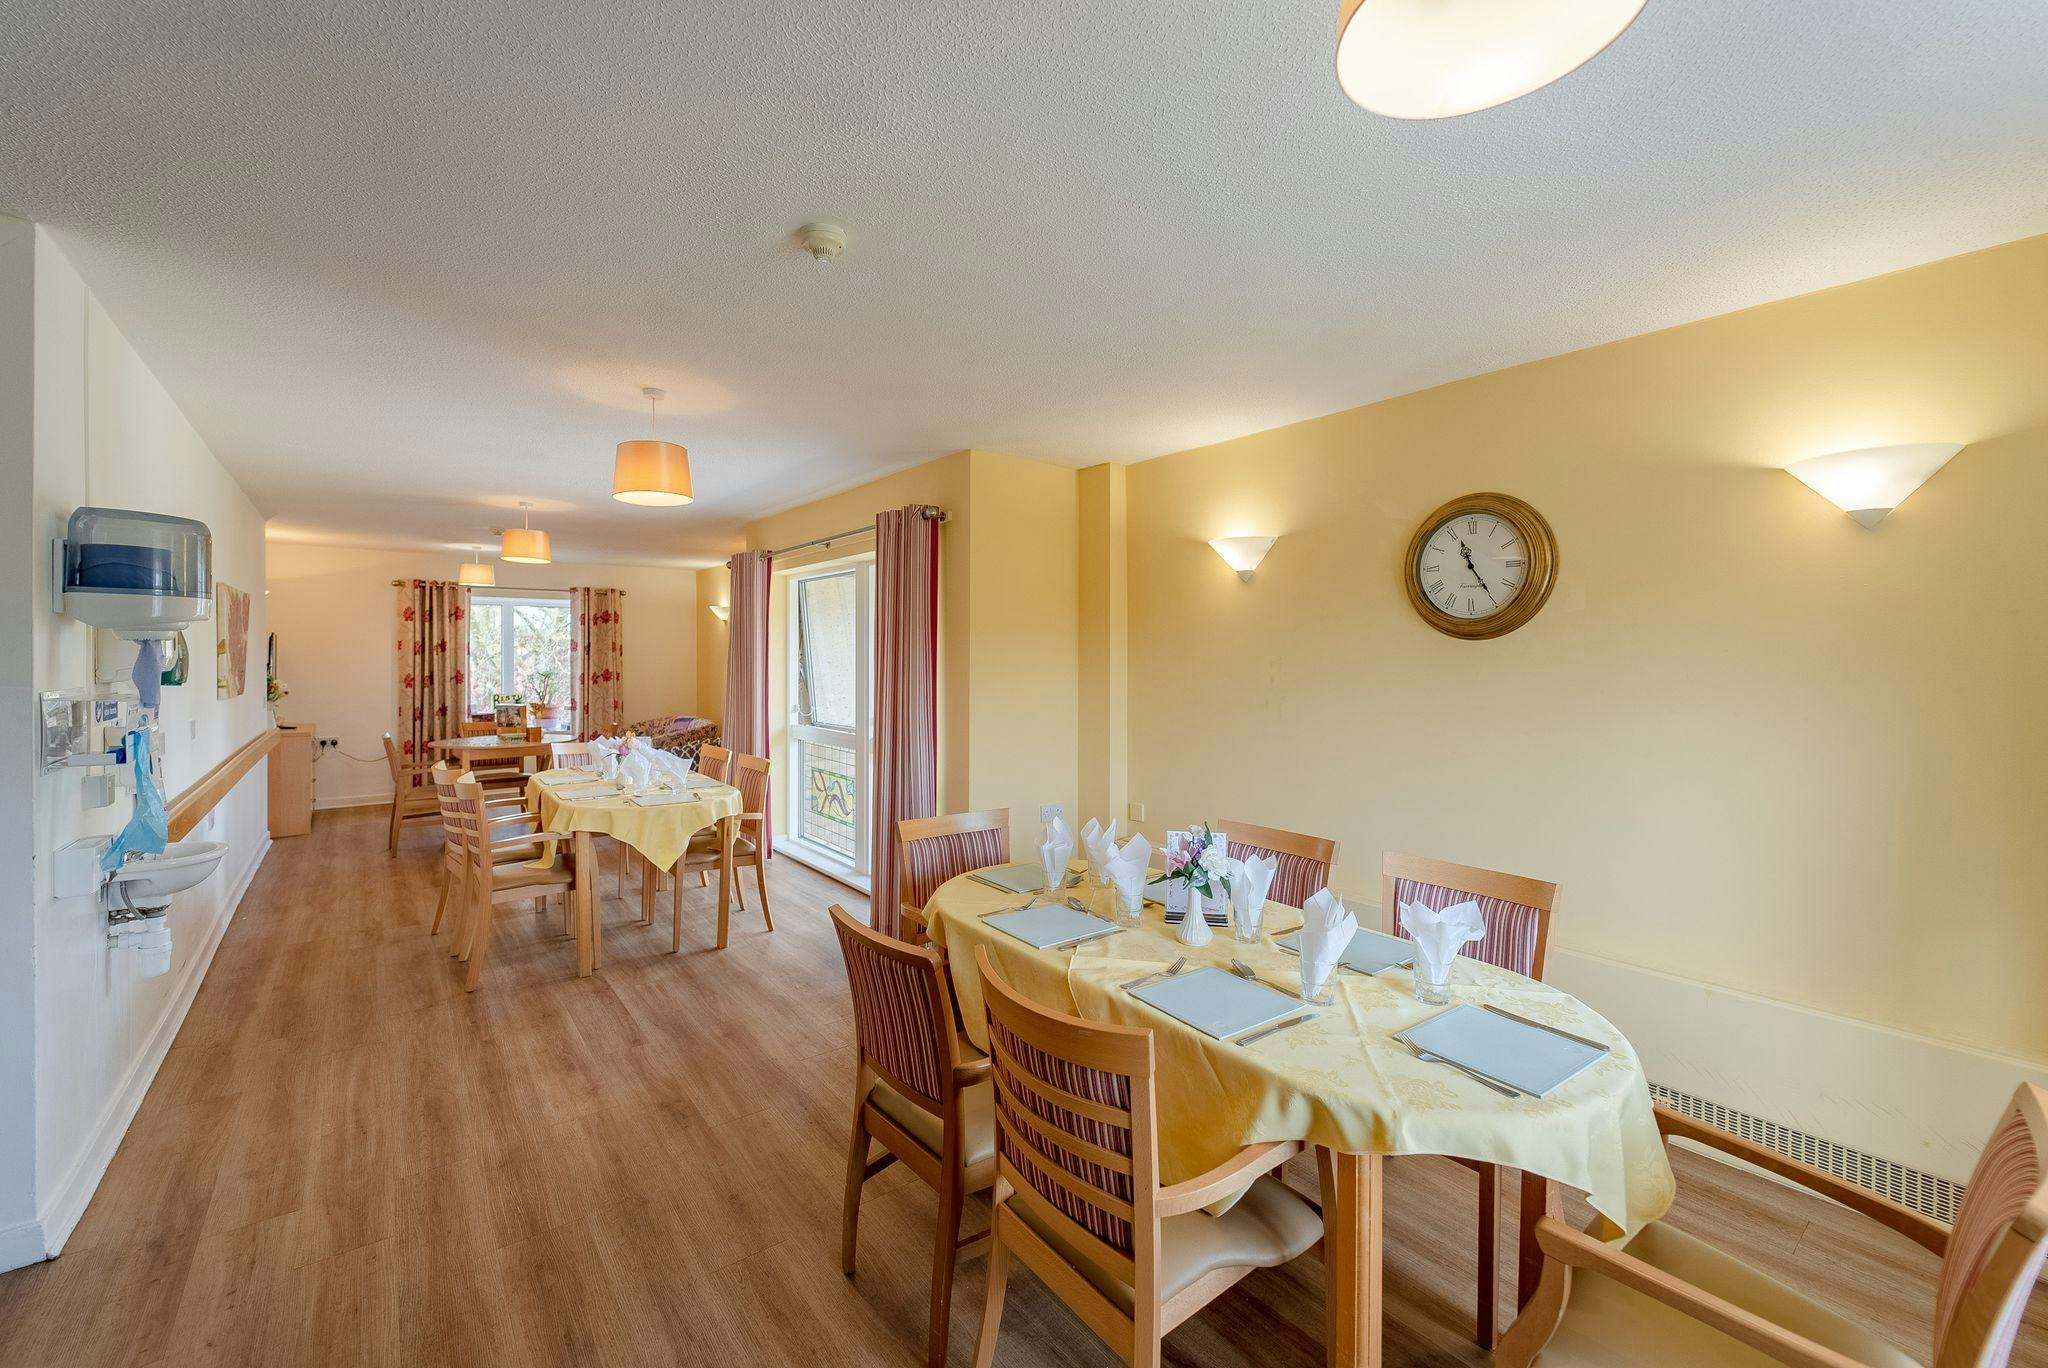 Dining area of Vera James House care home in Ely, Cambridgeshire